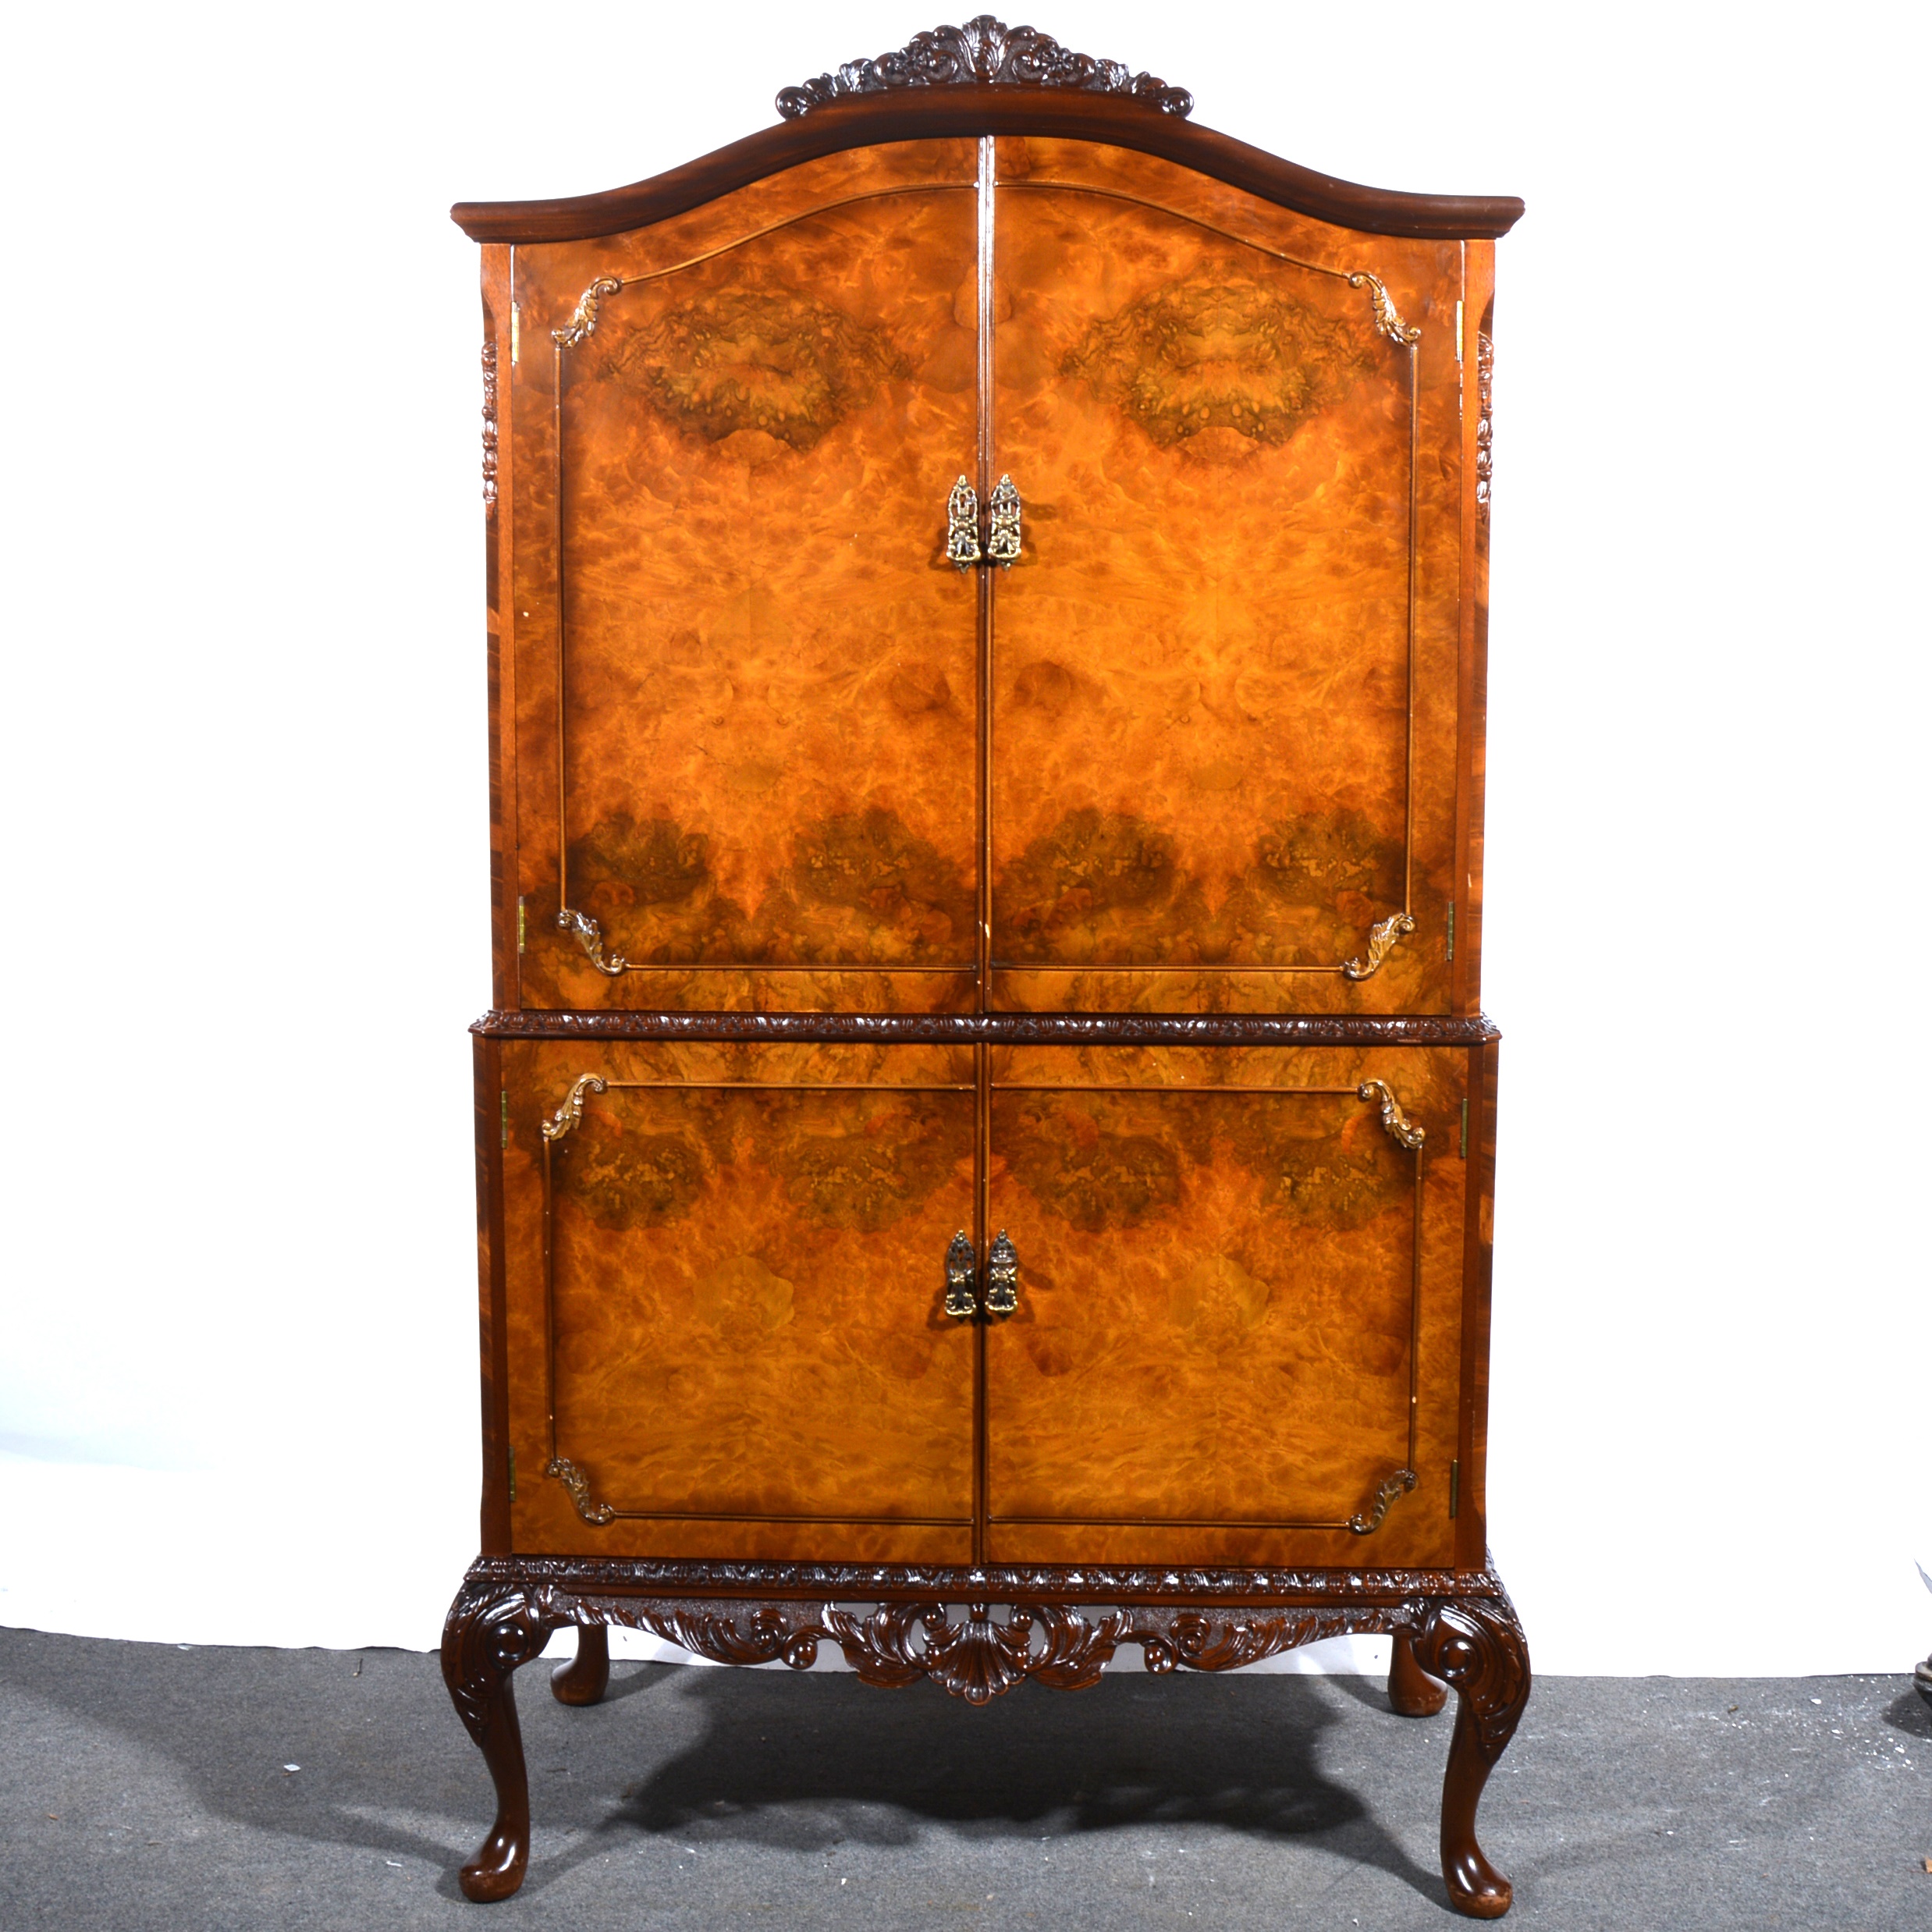 A reproduction burr walnut cocktail cabinet, Queen Anne style.